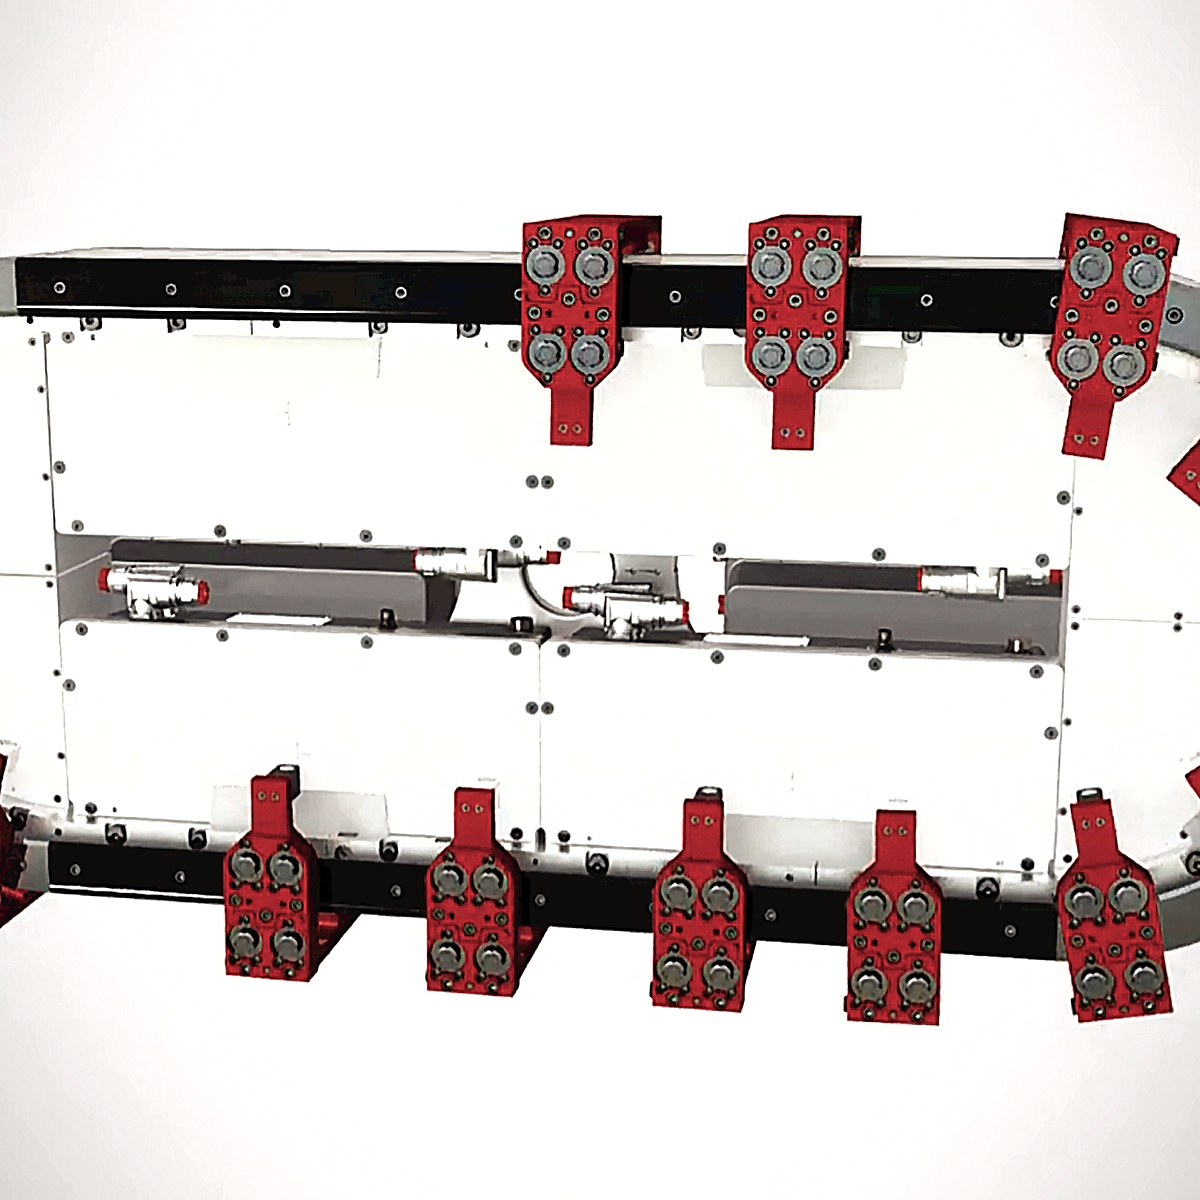 Introducing iTRAK: The Intelligent Track System | Rockwell Automation ...